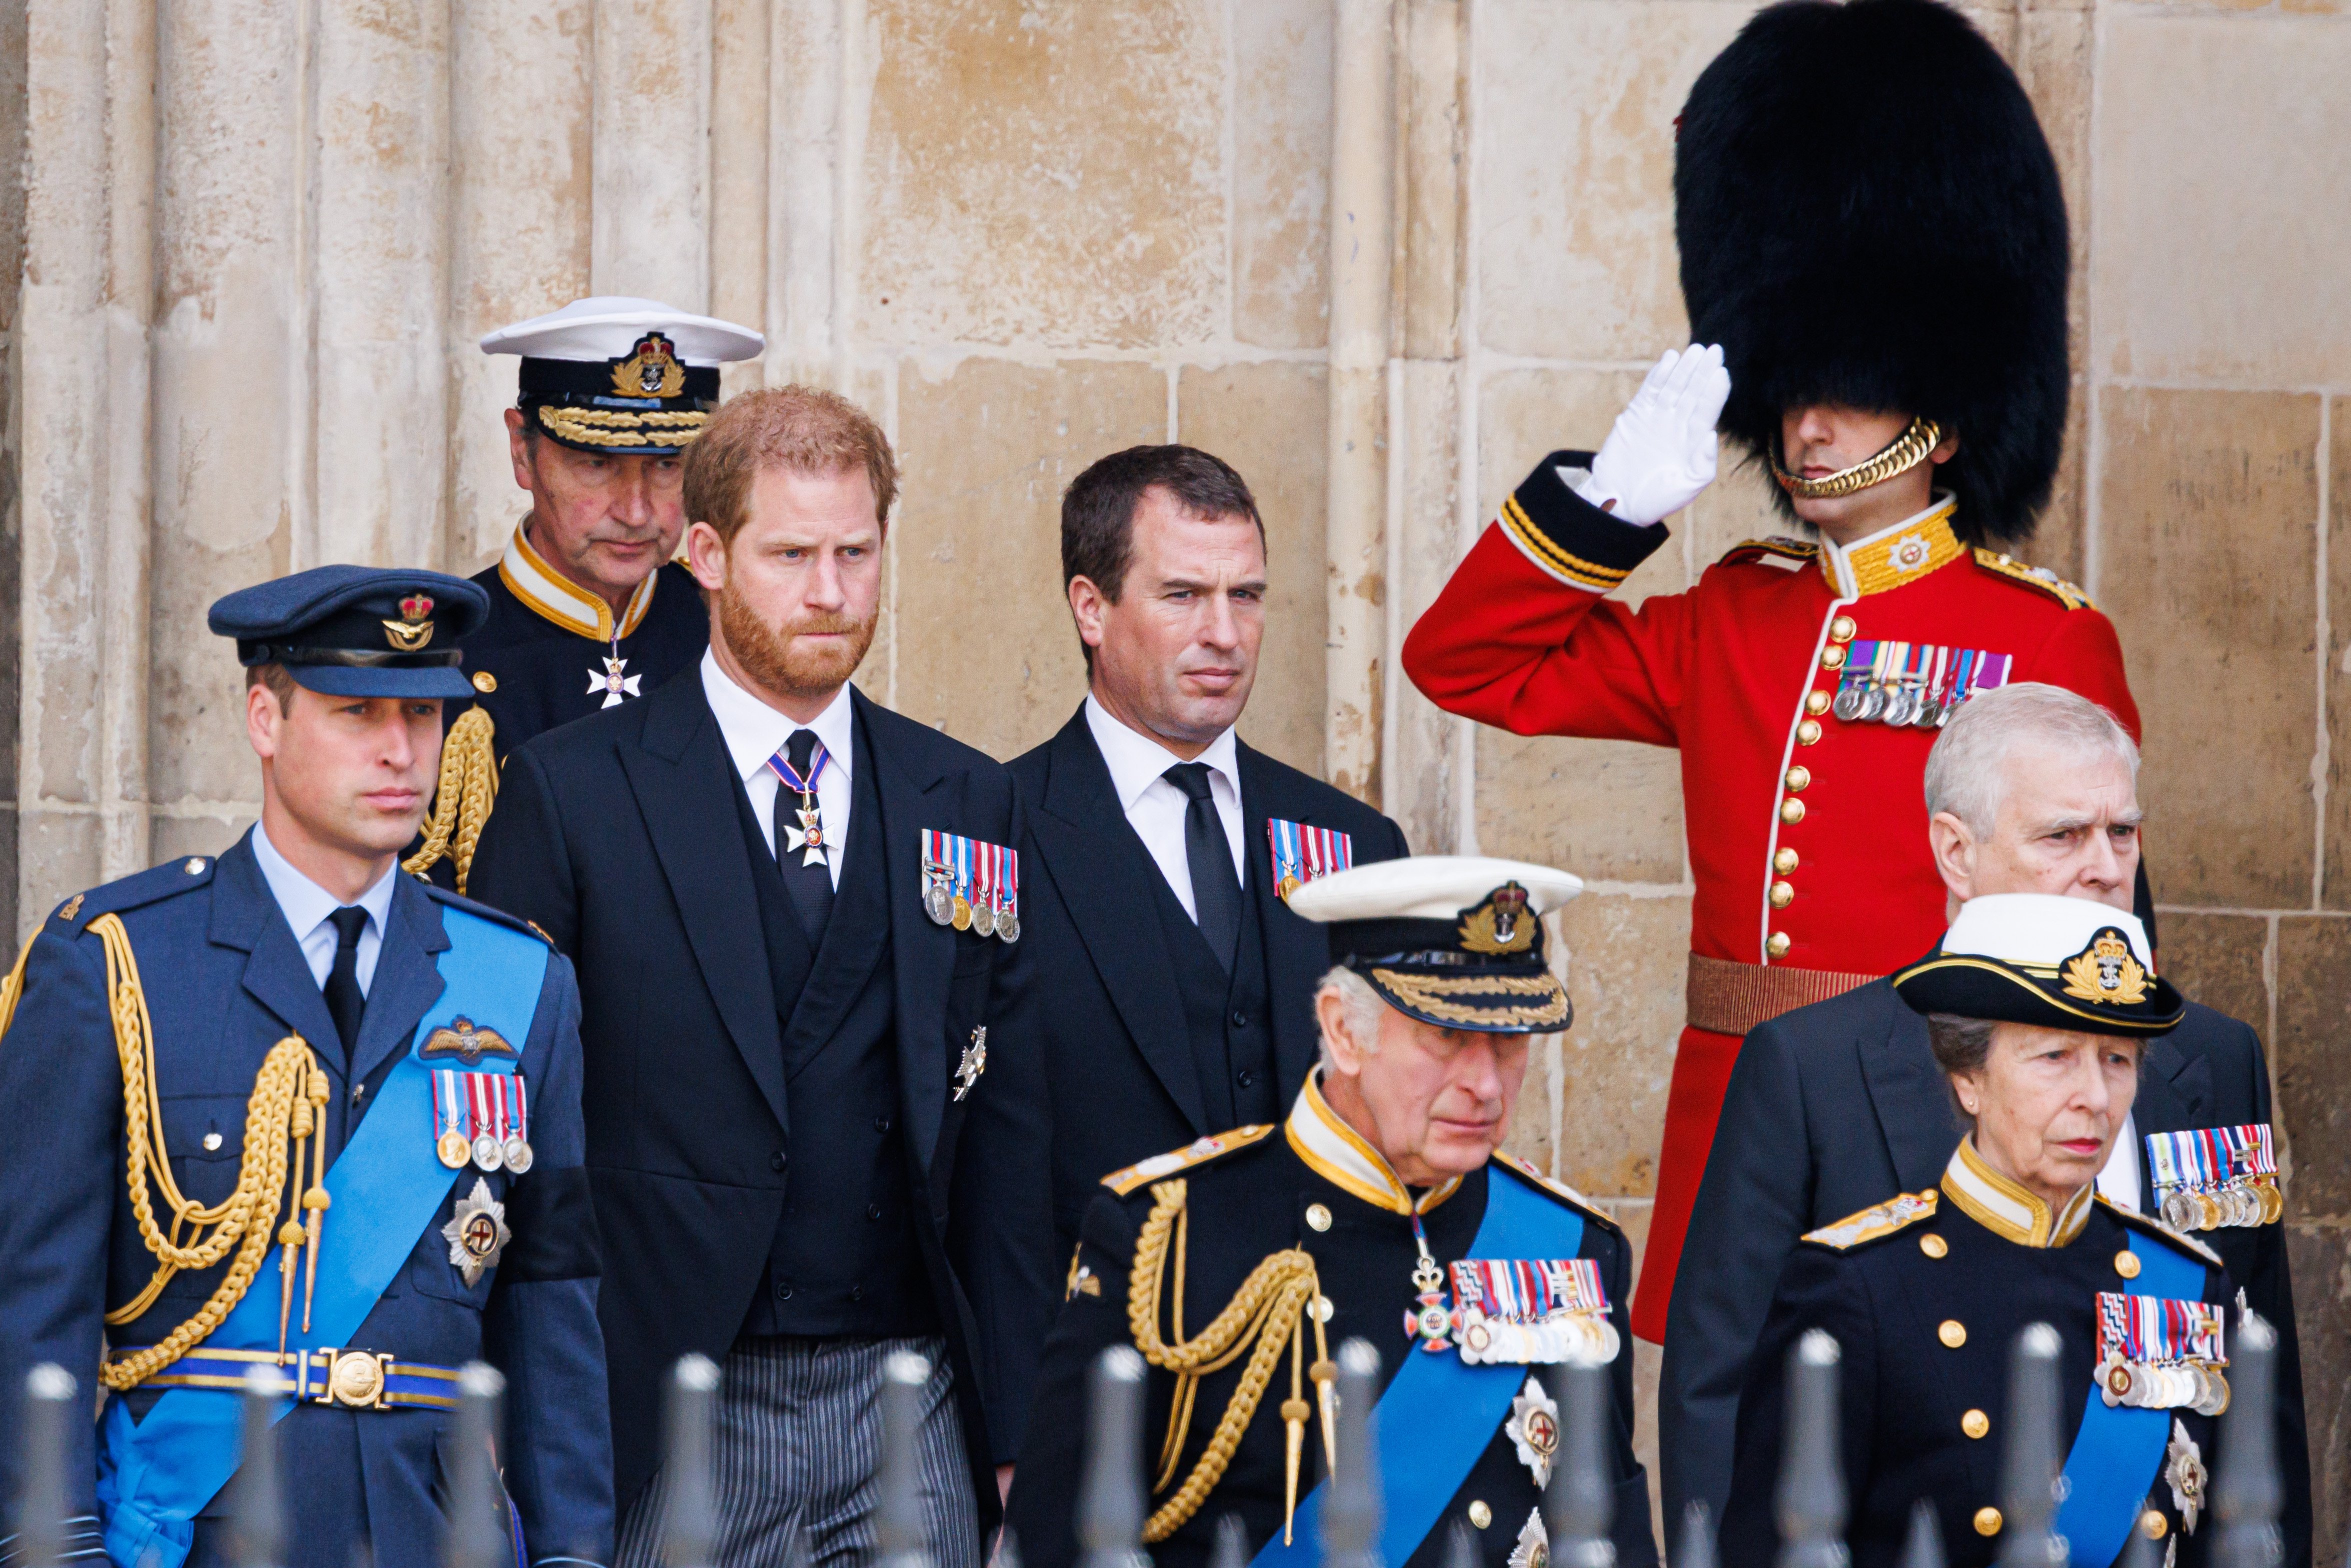 Prince William, Prince of Wales, Tim Laurence, Prince Harry, Duke of Sussex, Peter Phillips, Prince Andrew, Duke of York, King Charles III, Prince Edward, Earl of Wessex, and Anne, Princess Royal, during the State Funeral of Queen Elizabeth II at Westminster Abbey on September 19, 2022, in London, England. | Source: Getty Images